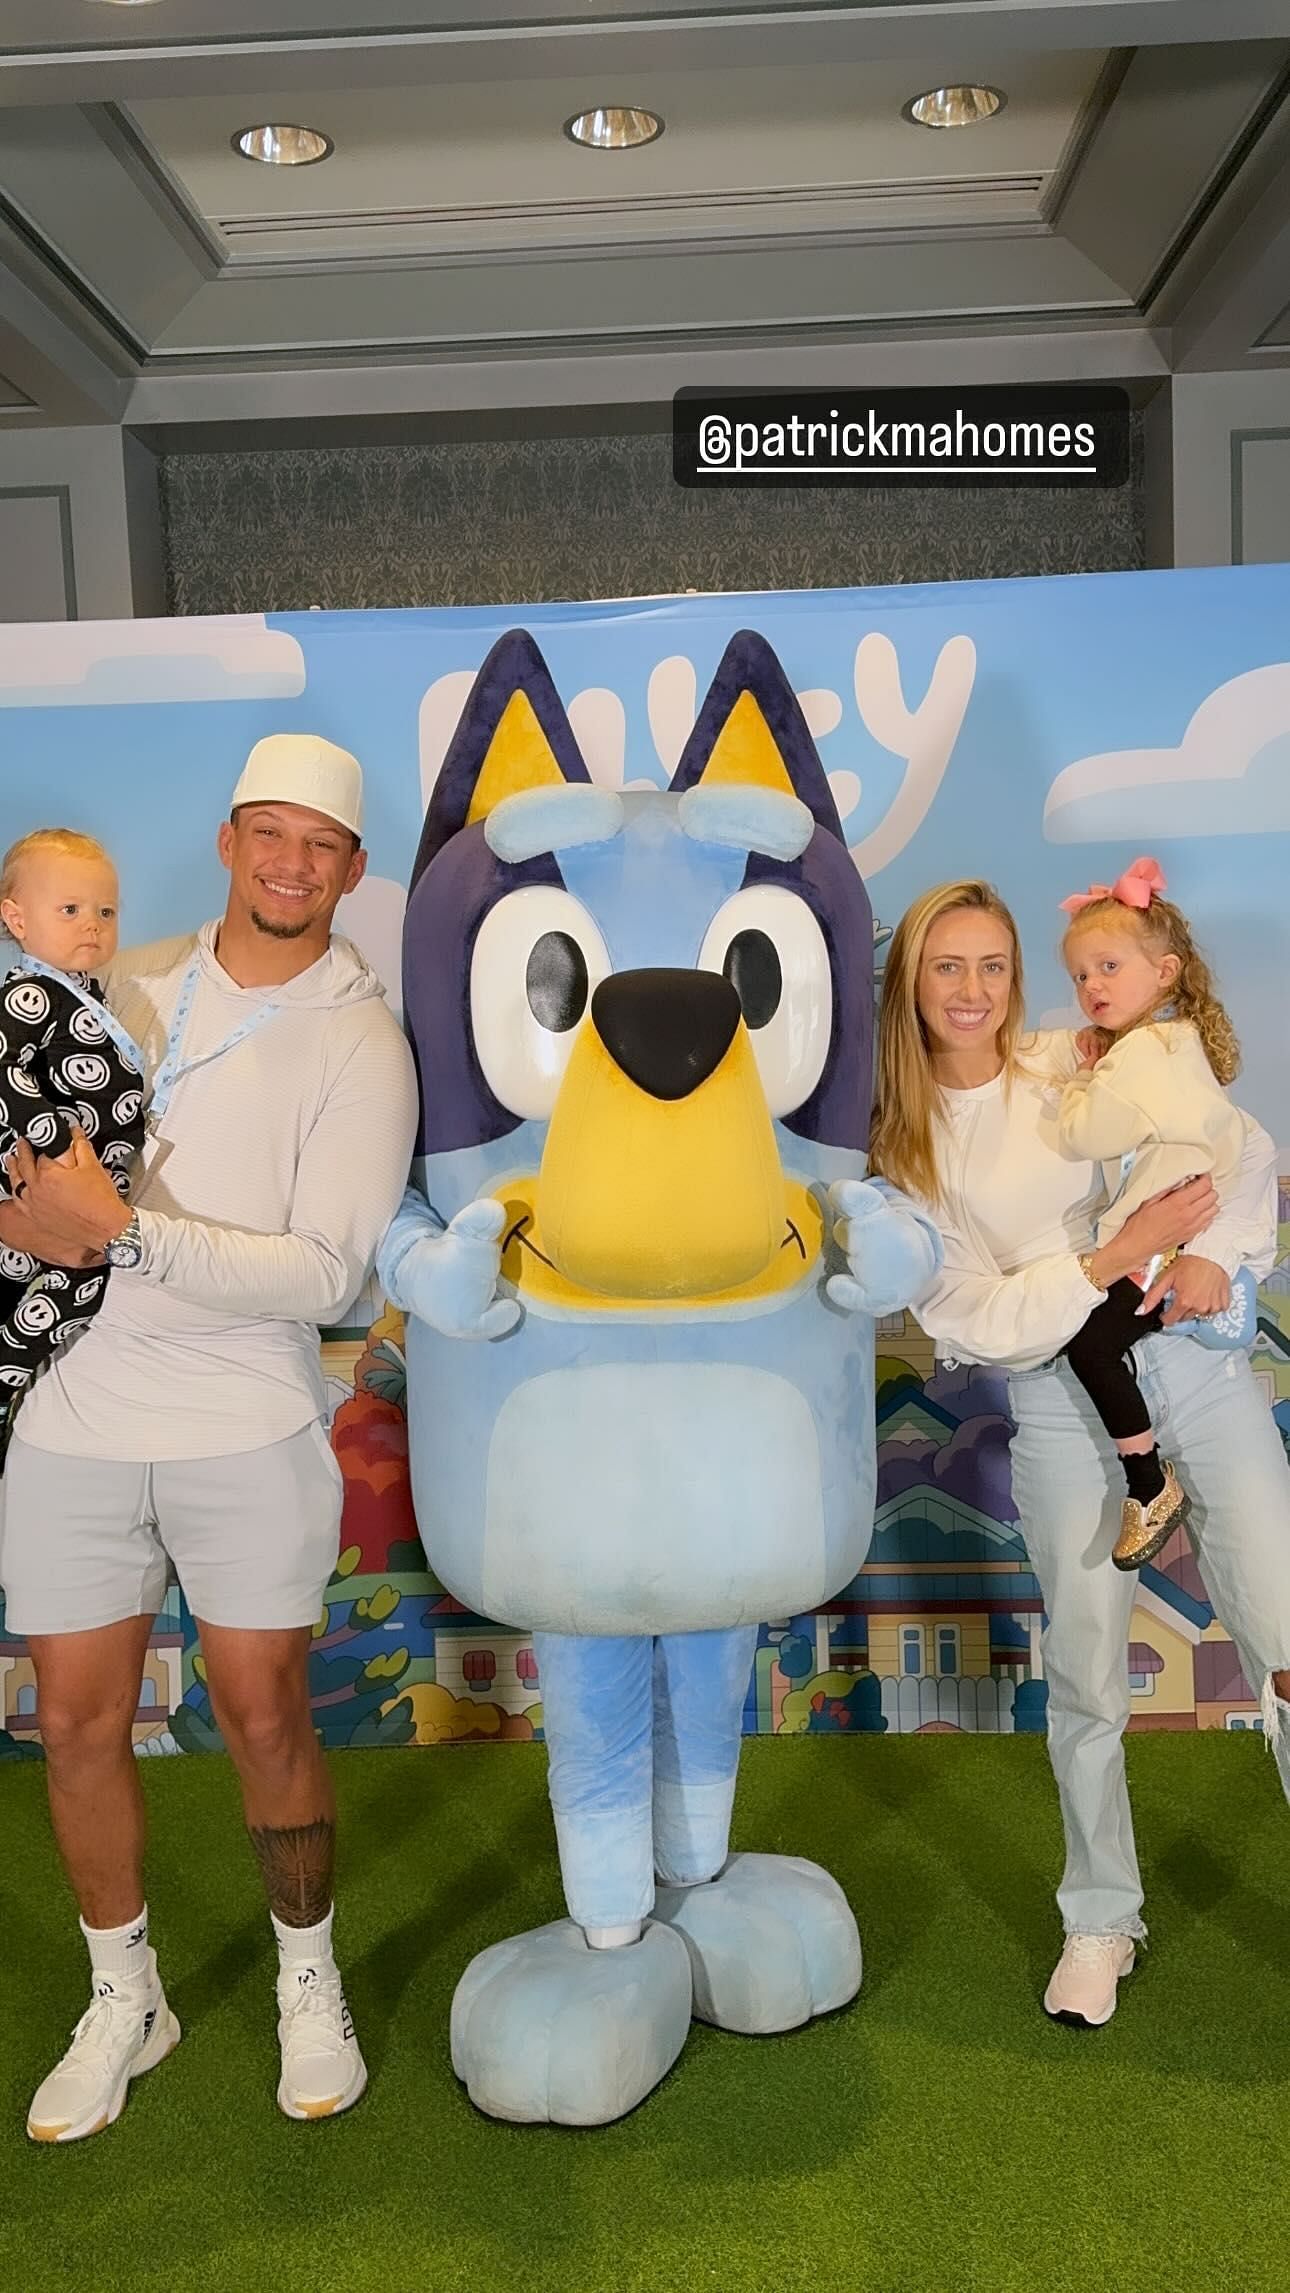 Patrick Mahomes and his family with Bluey